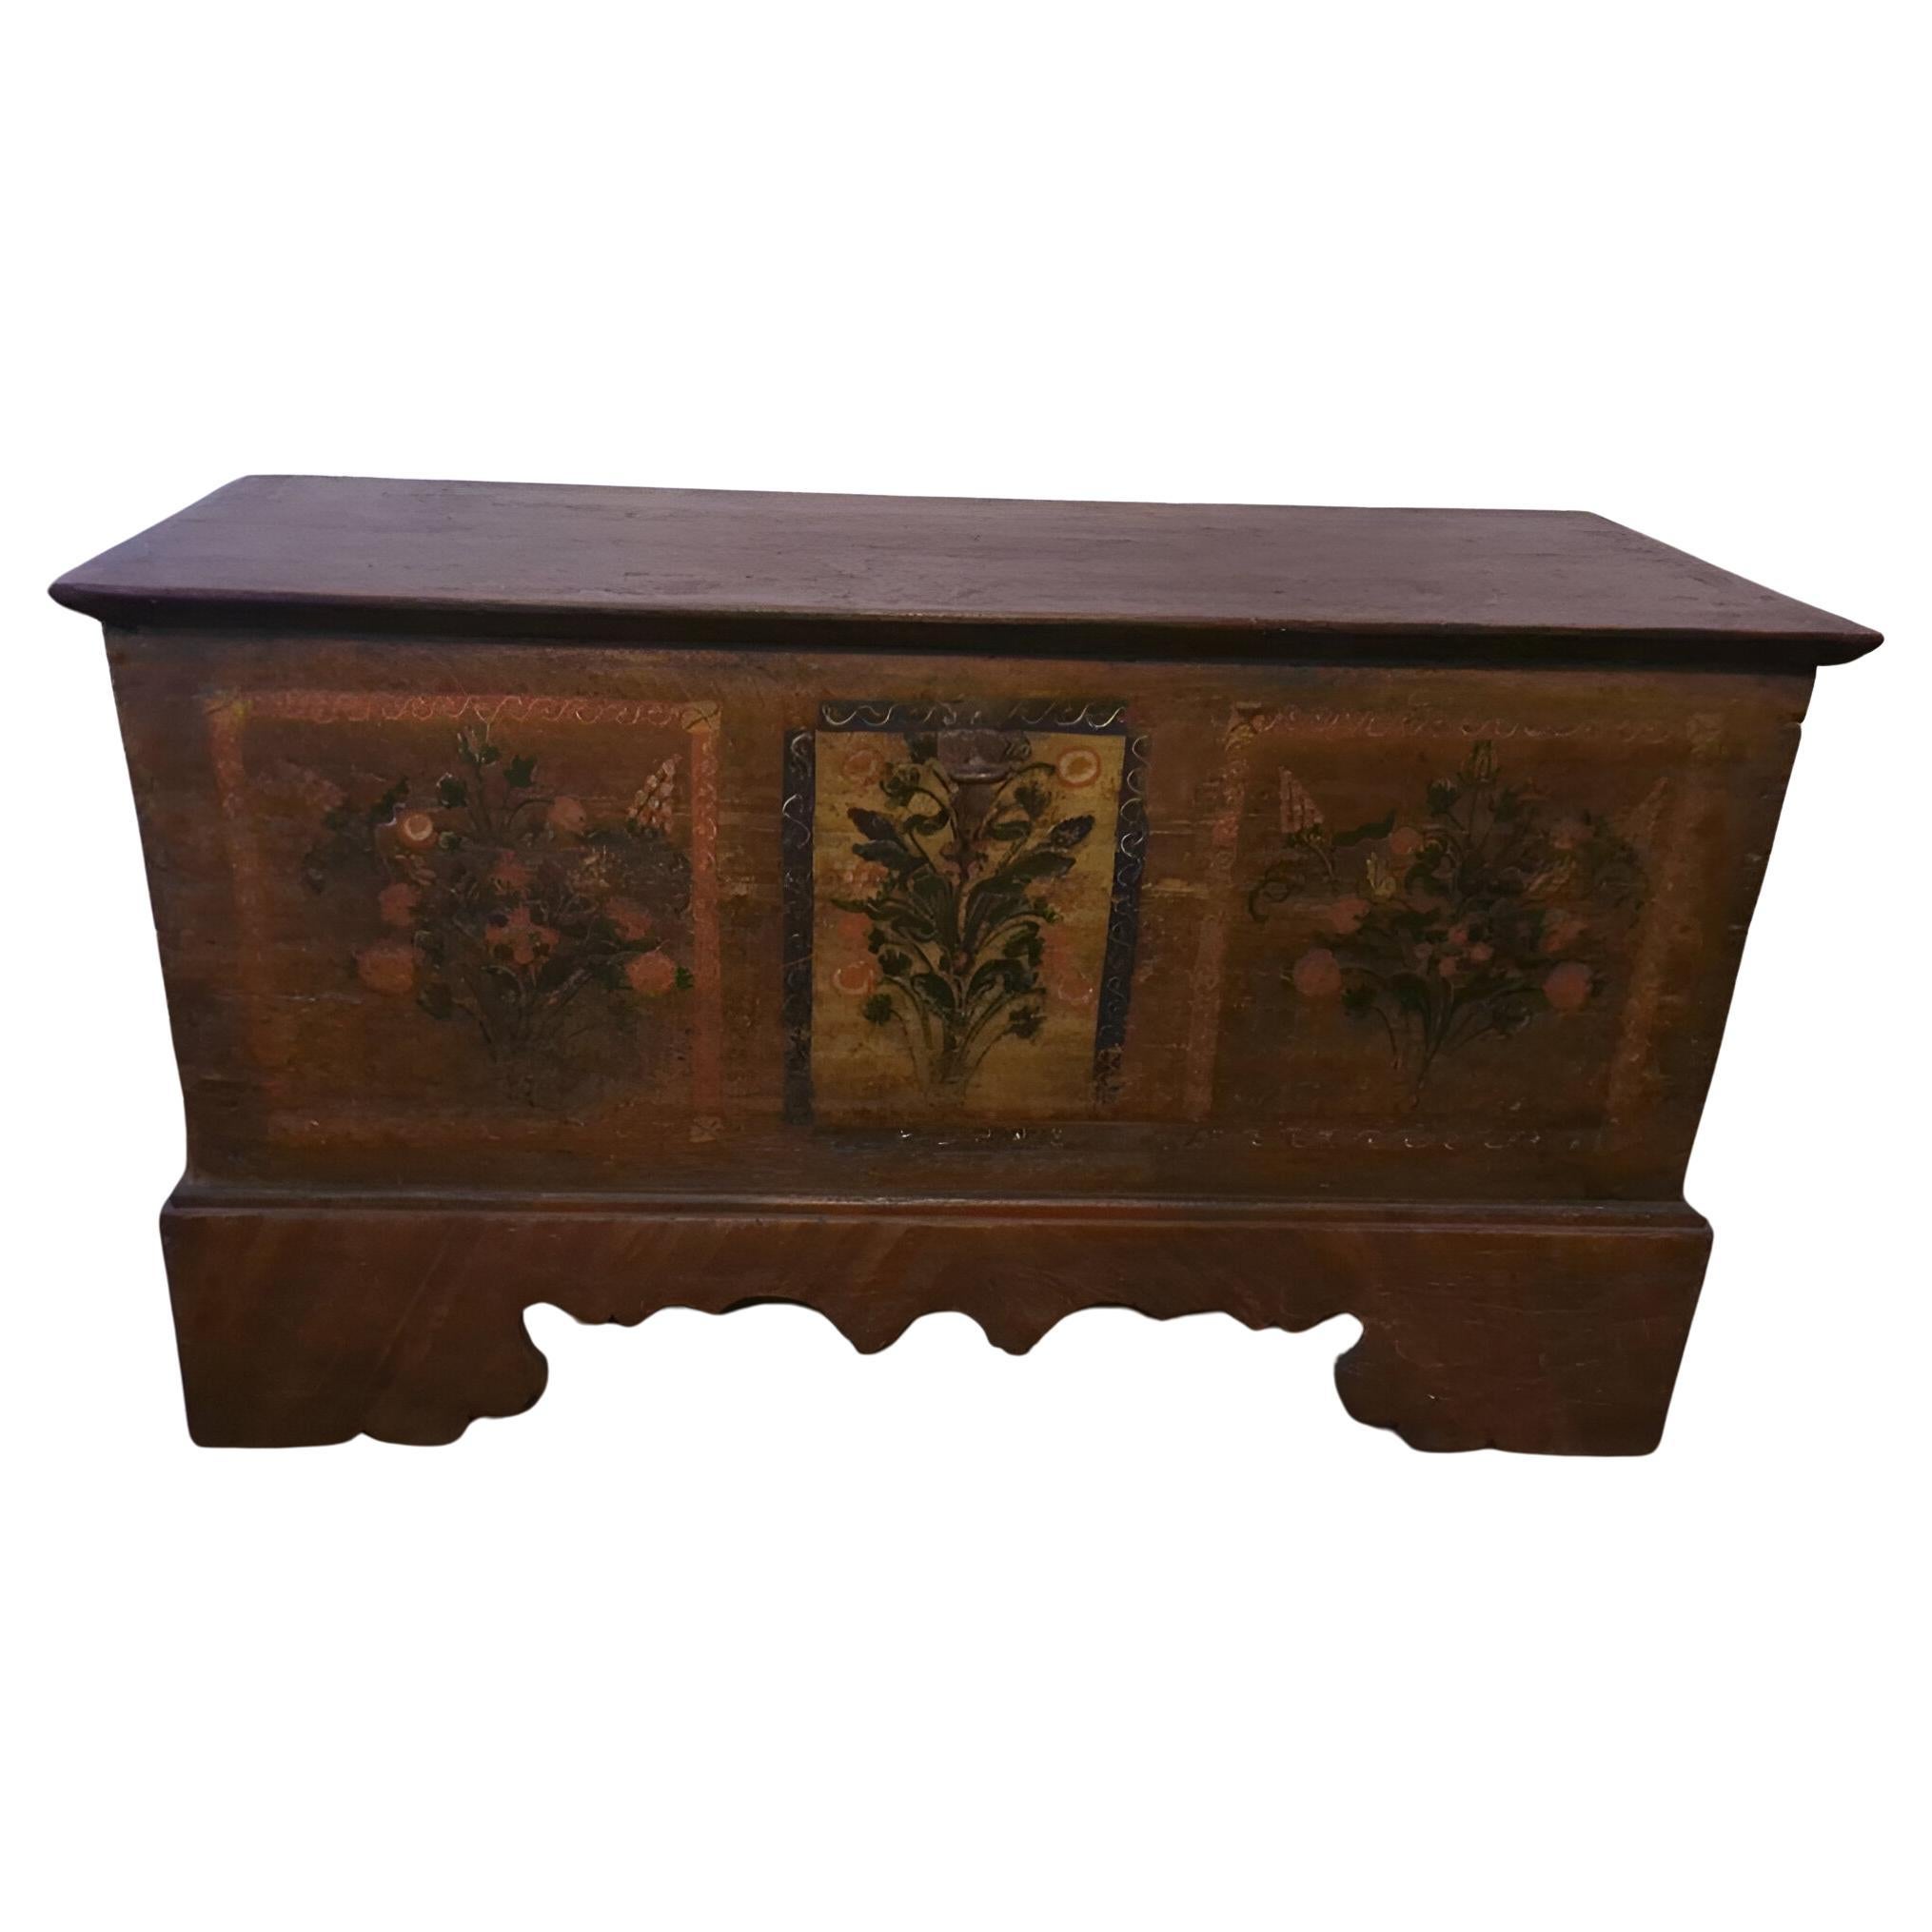 Spruce wedding chest For Sale